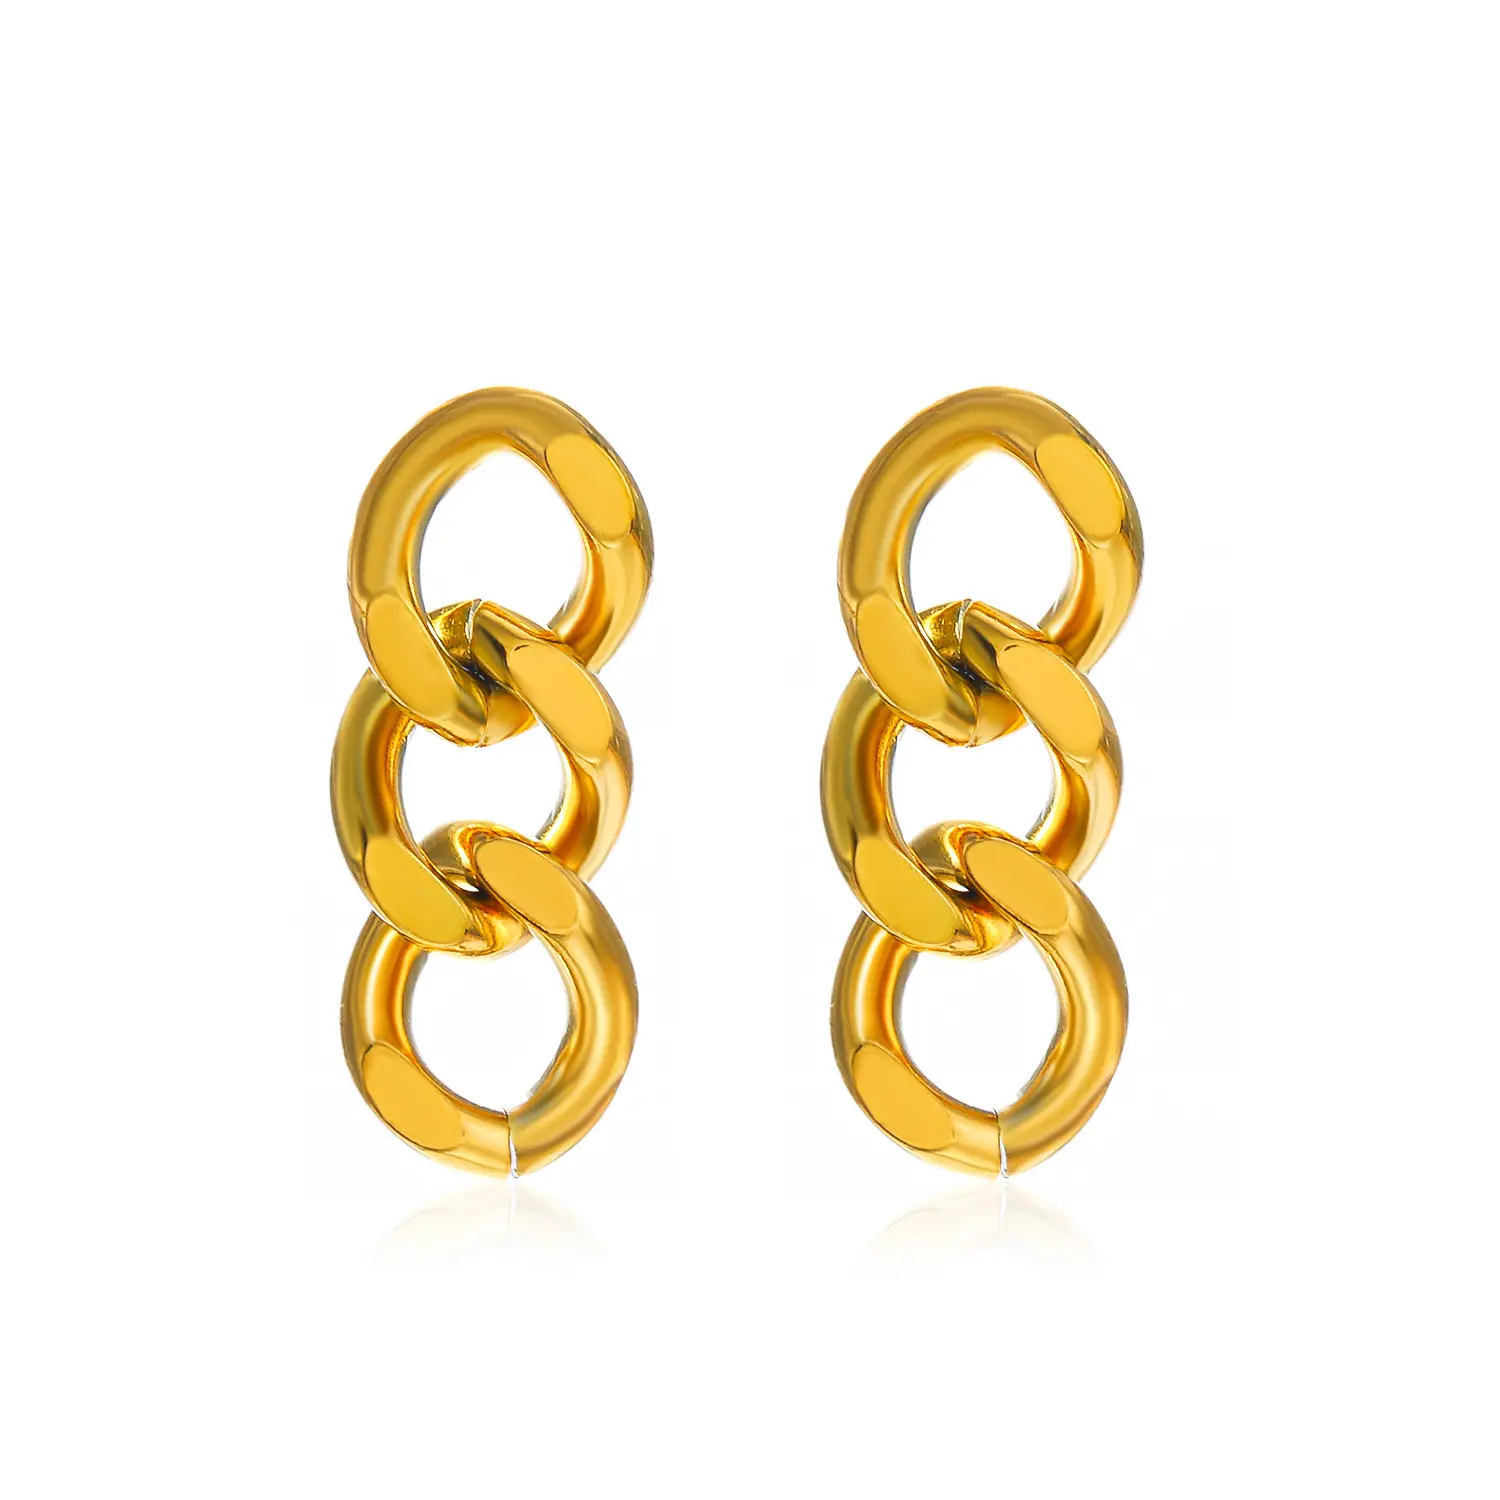 Fashionable stainless steel 18K gold plated Cuban style curb chain earrings punk jewelry as gifts for women